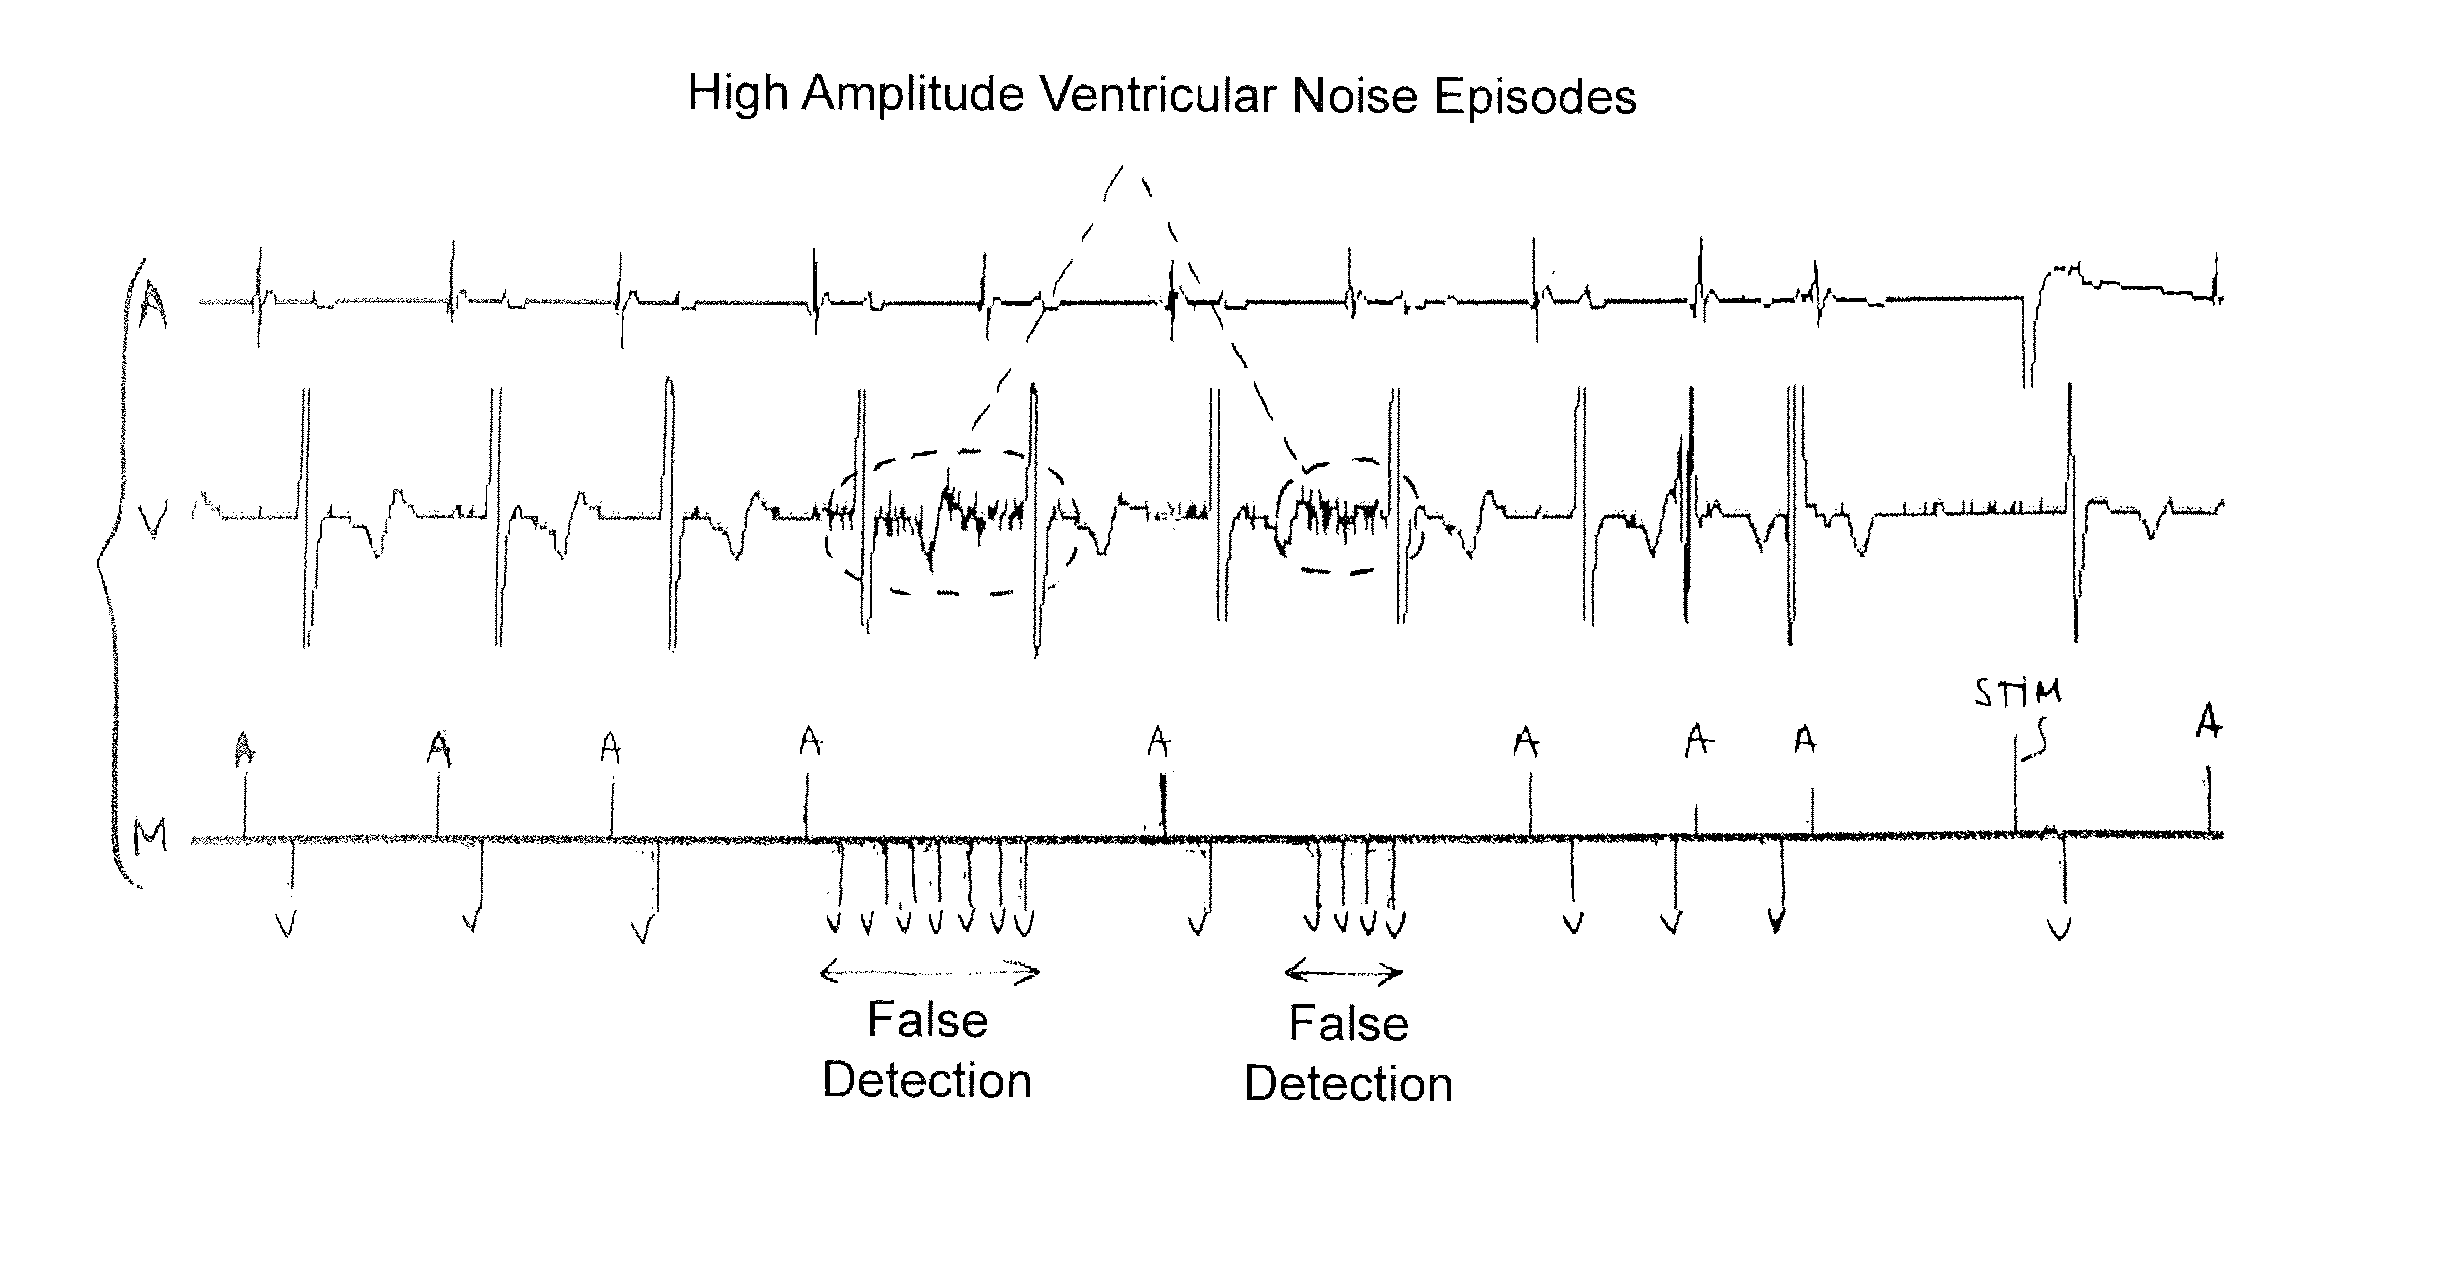 Implantable defibrillator/cardioverter medical device with a dynamically adjustable threshold for ventricular detection